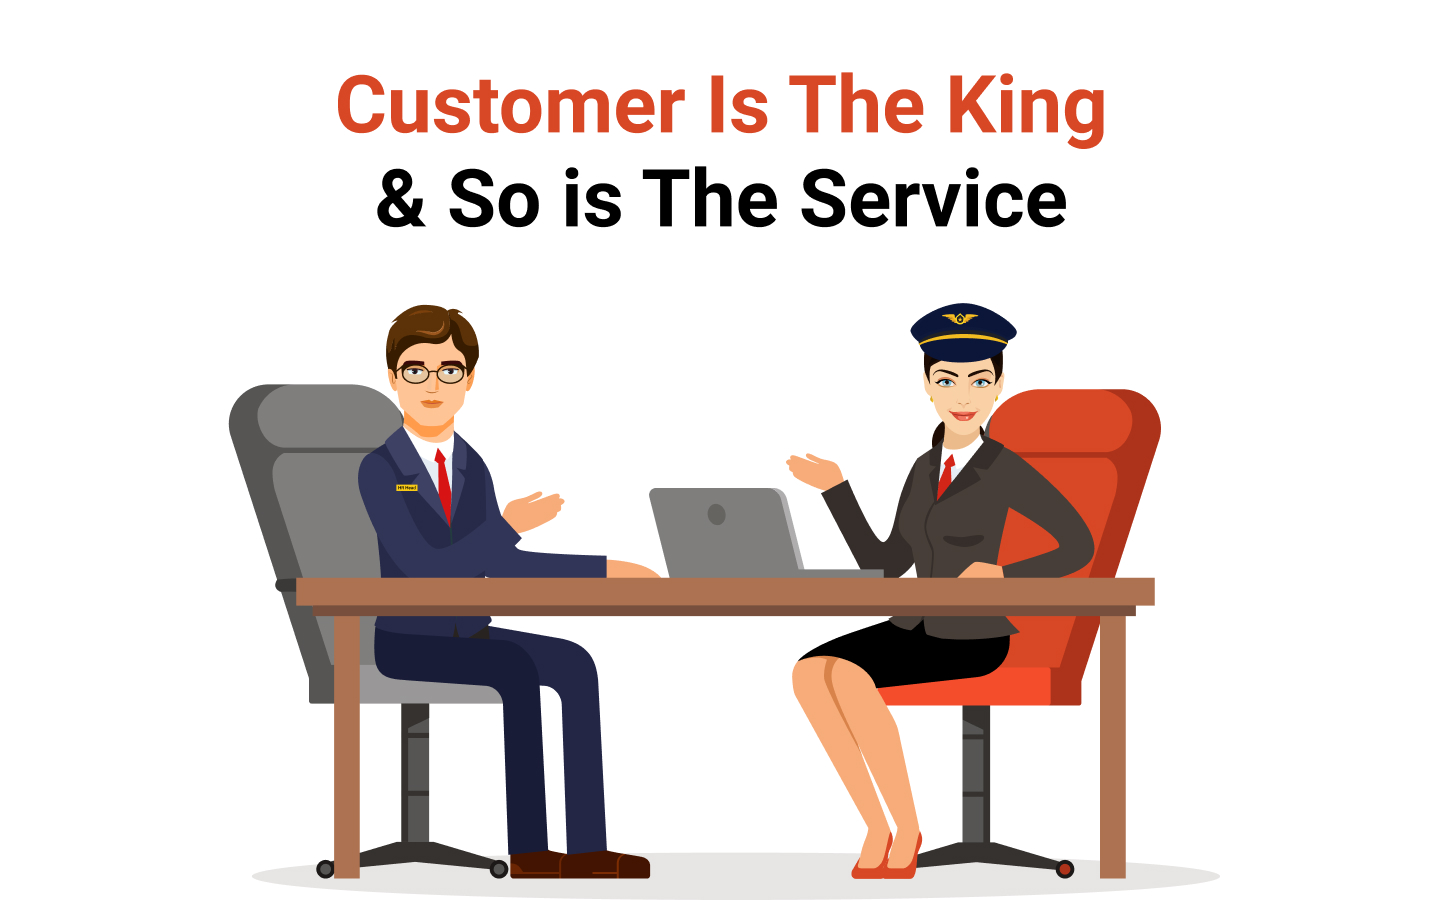 Customer Is The King & So is The Service